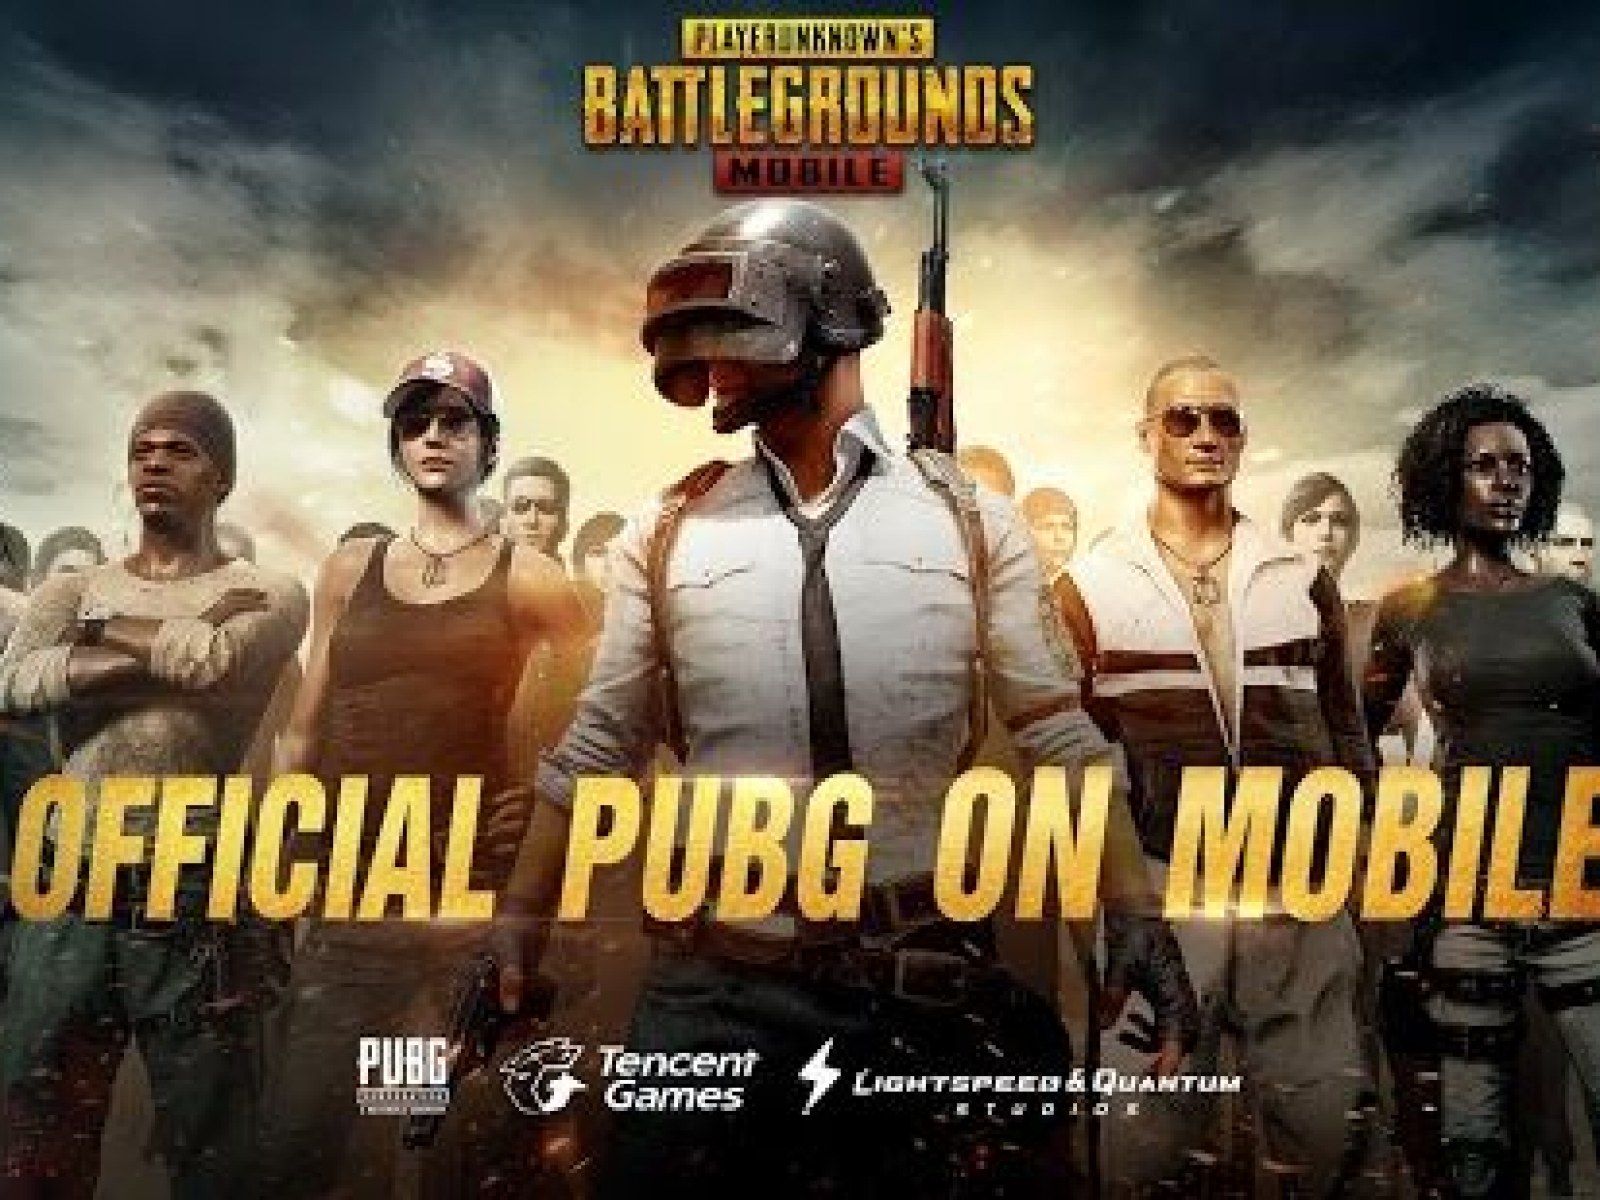 Mobile room enter chat in pubg HOW DO